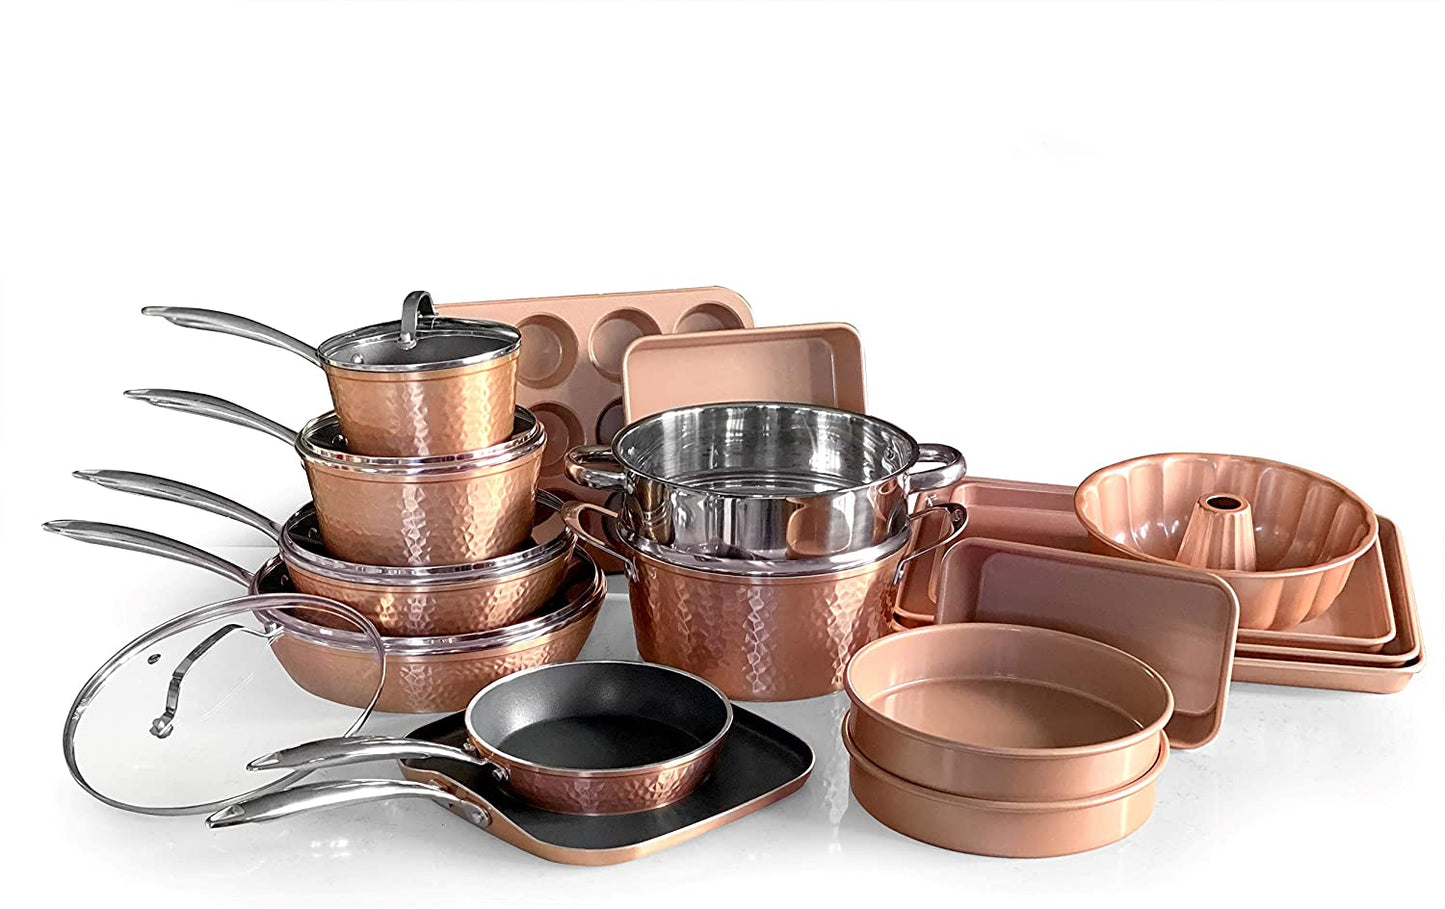 NEWARE 13 Piece ROSE Gold STAINLESS STEEL Cookware SET